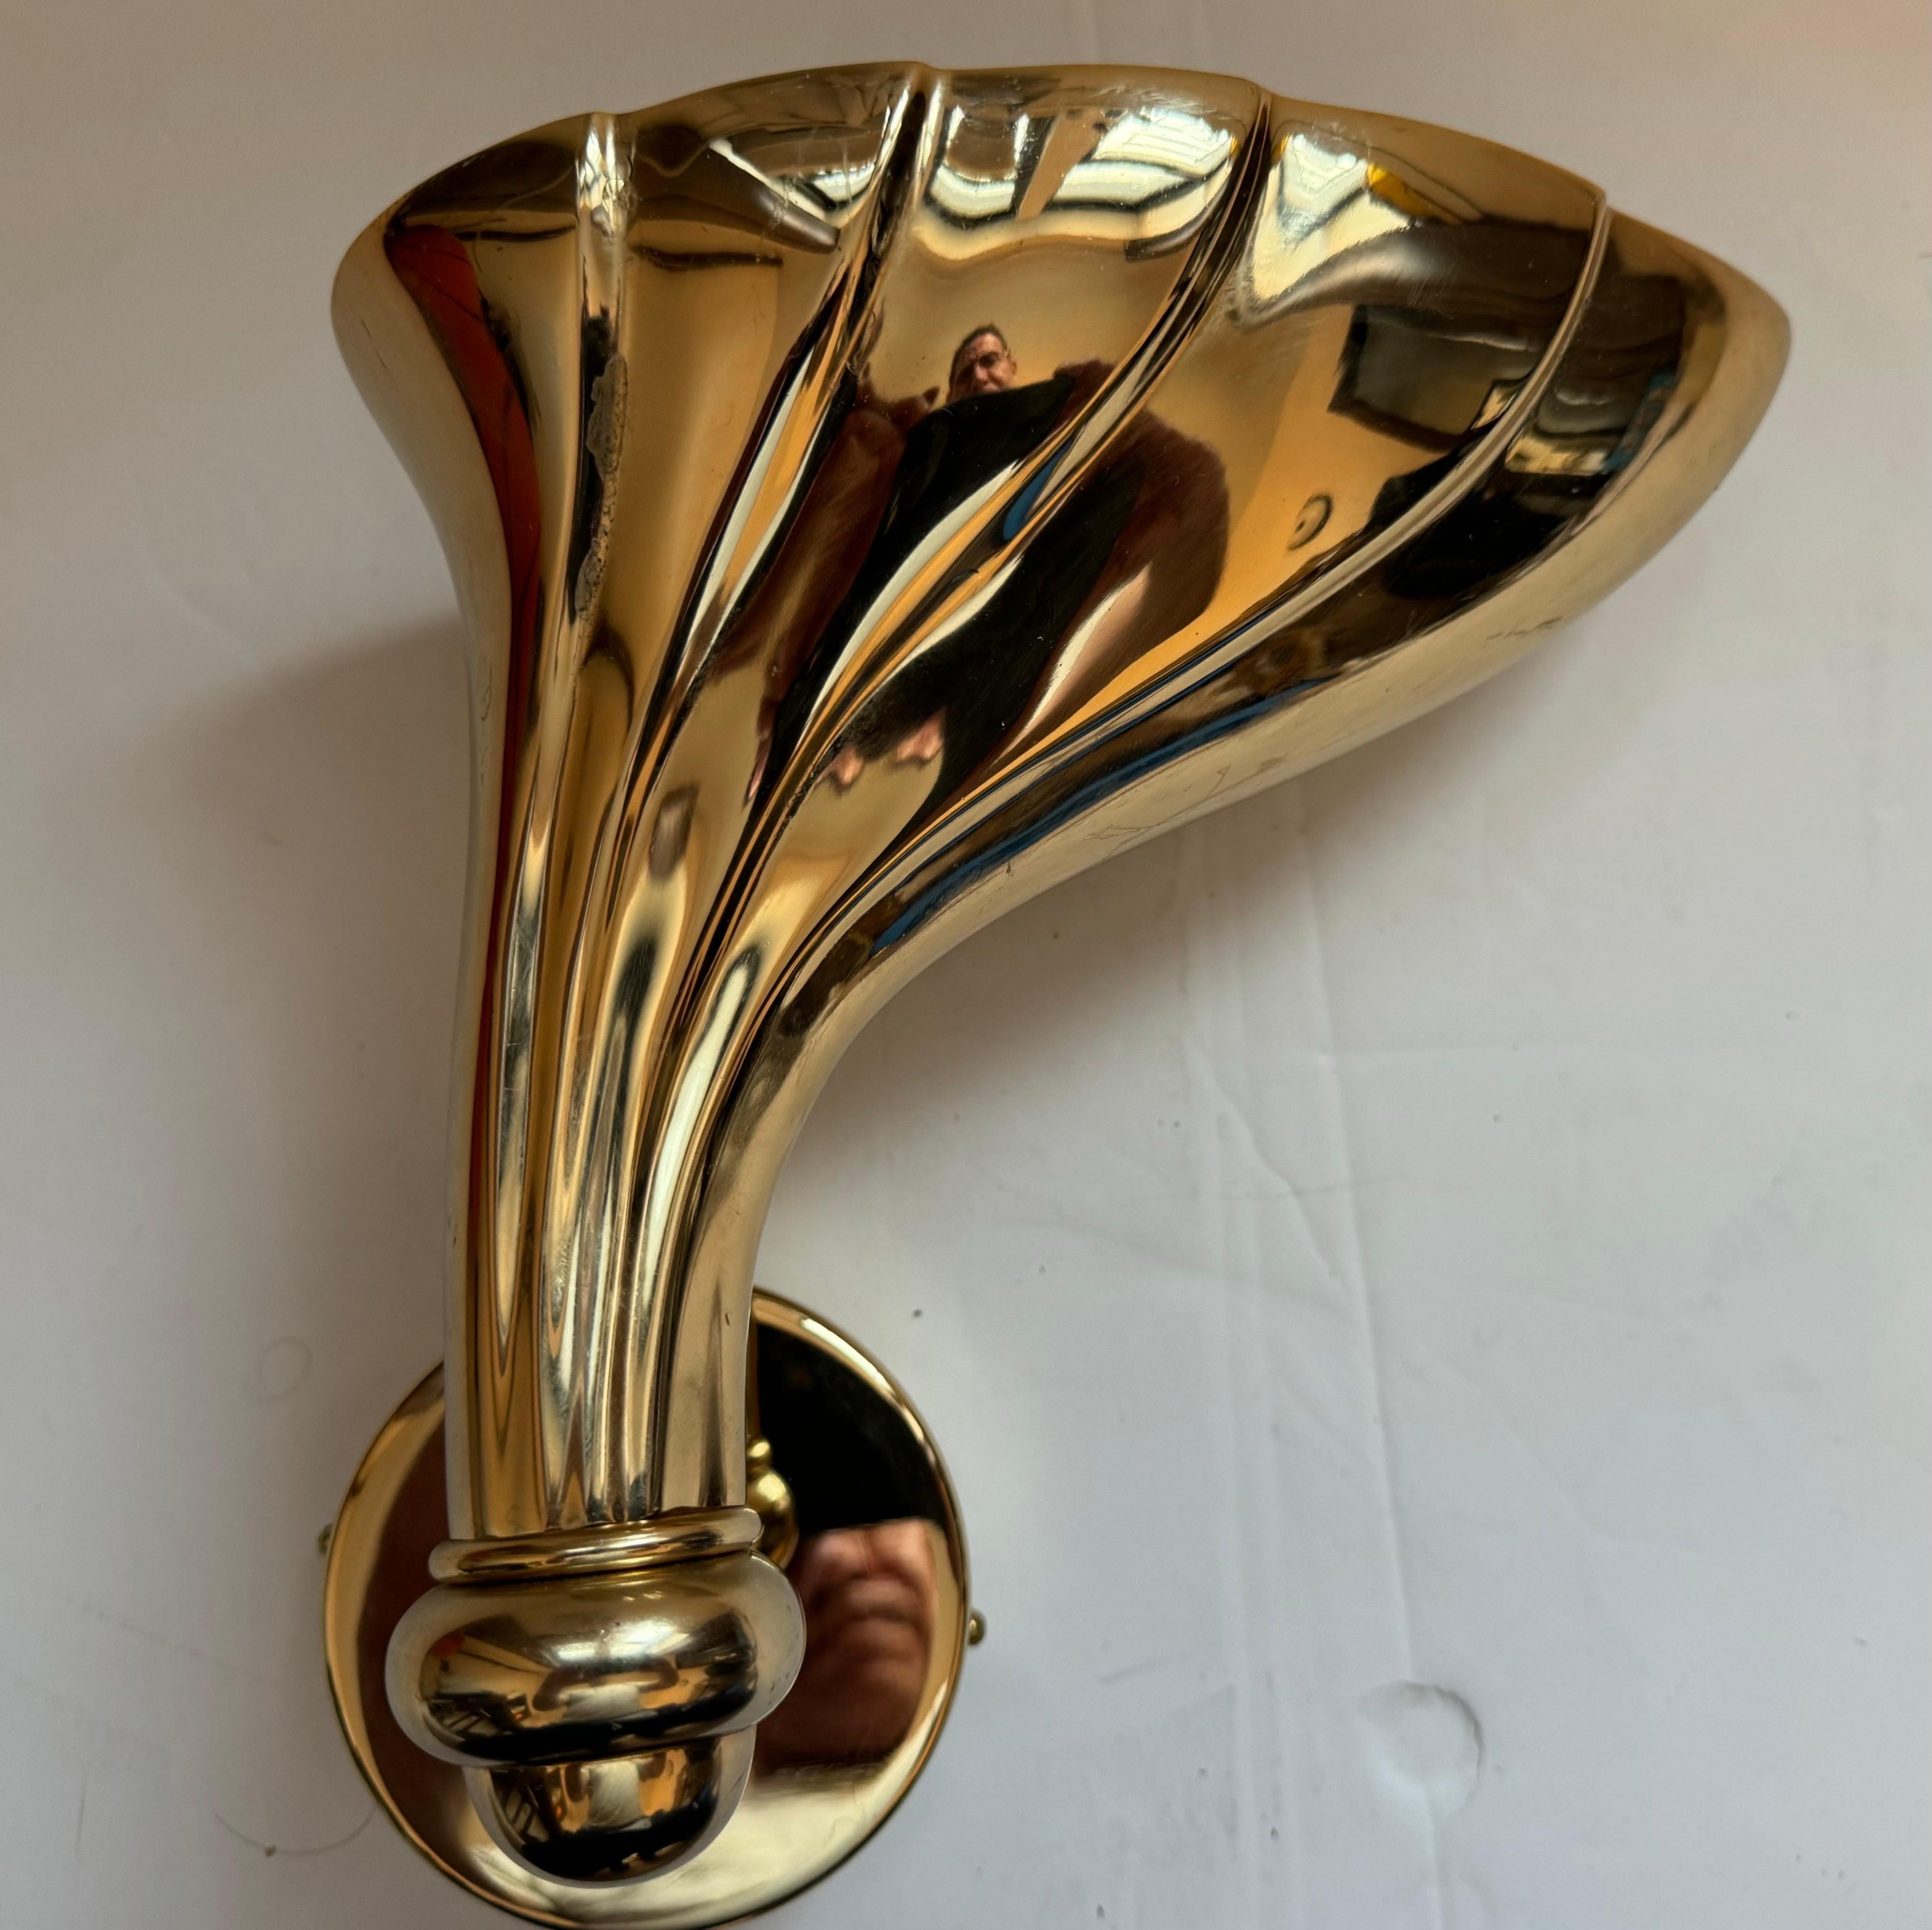 A rare polished bronze sculptural Italian 1980s wall lamp by Fratelli Martini. A complimentary looking other pair available.